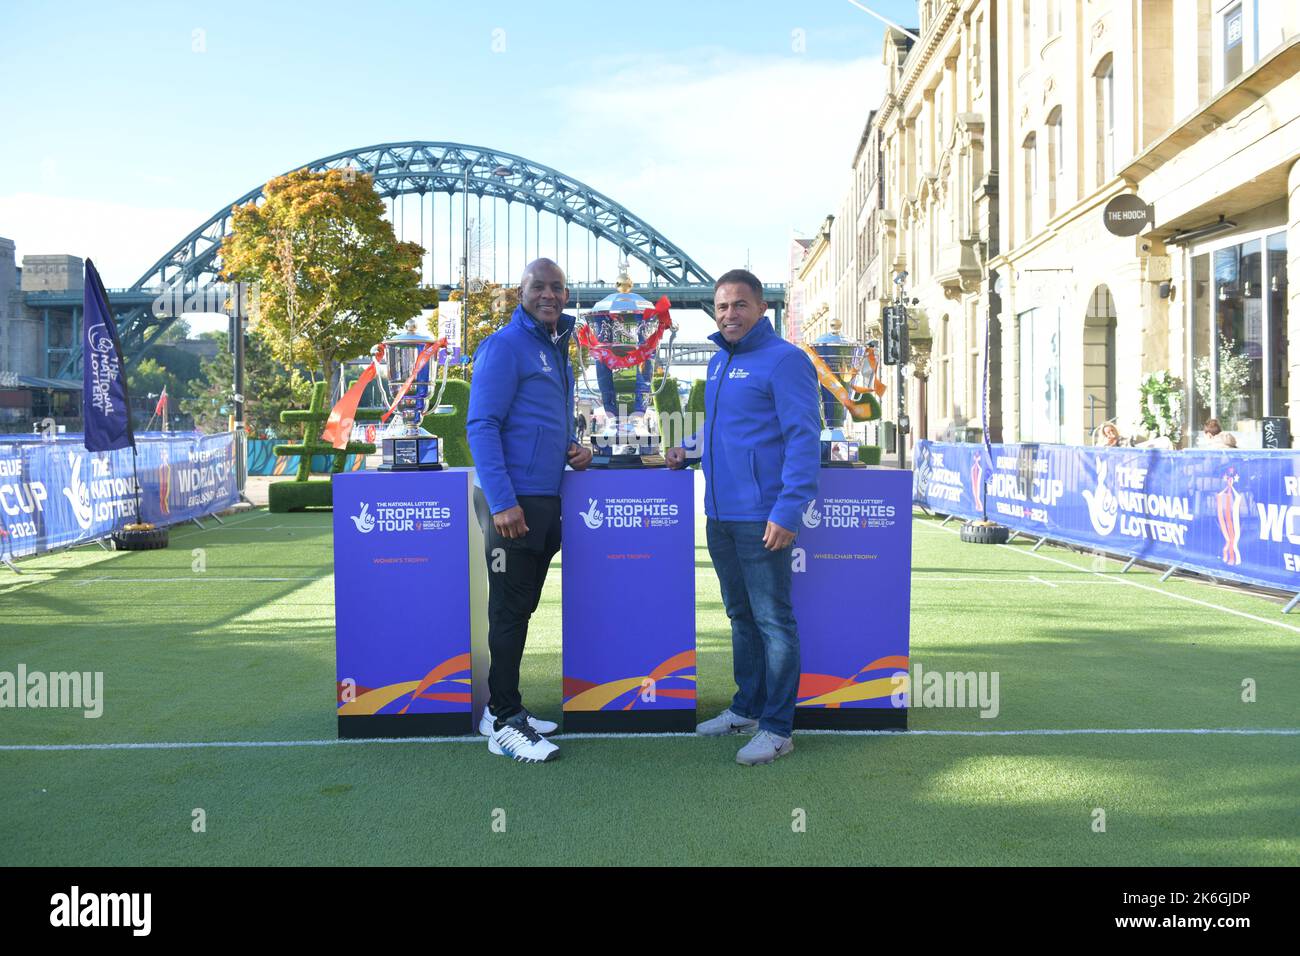 Newcastle's Quayside, UK, 14/10/2022 Rugby League World Cups 2021 on display, Fan Village on Newcastle's Quayside, UK Stock Photo